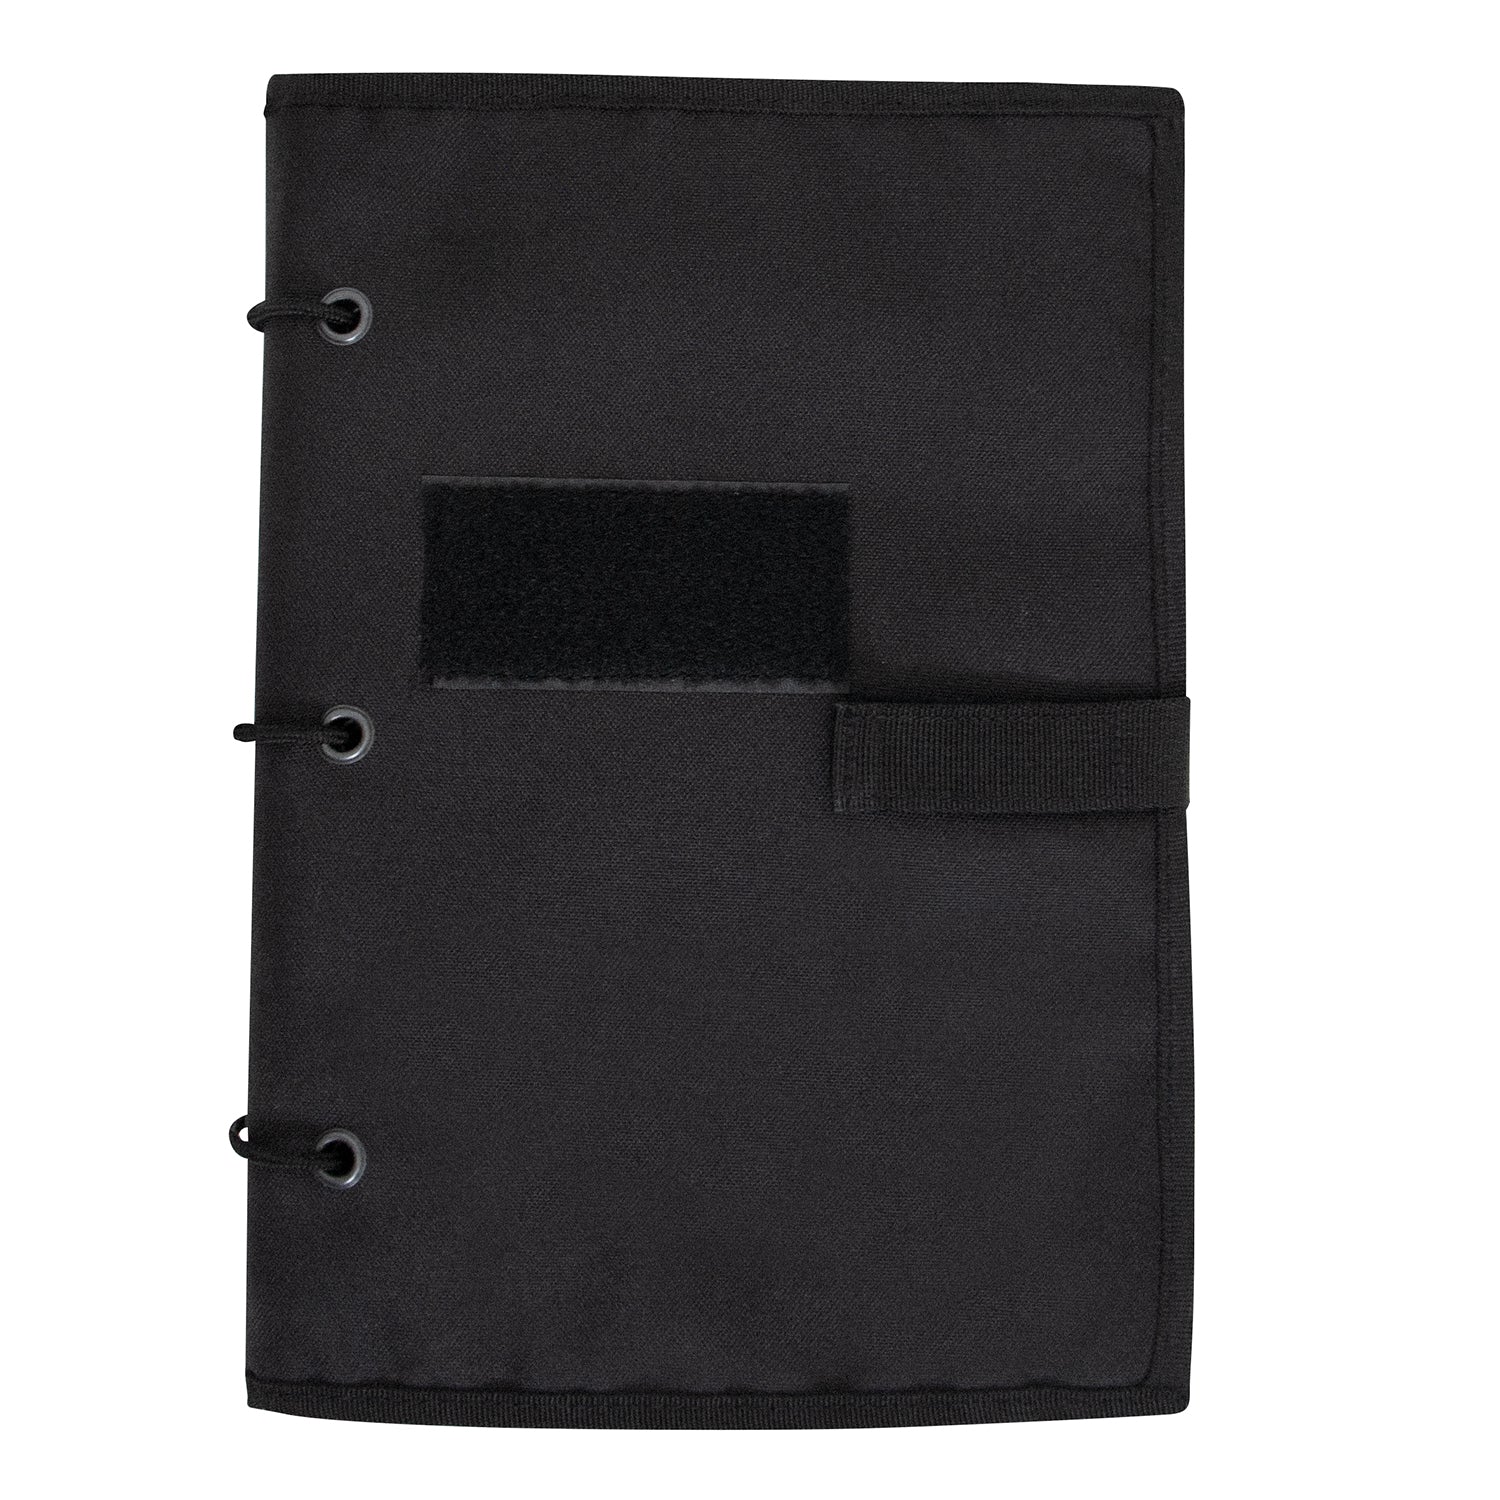 Rothco Hook & Loop Patch Book - Tactical Choice Plus